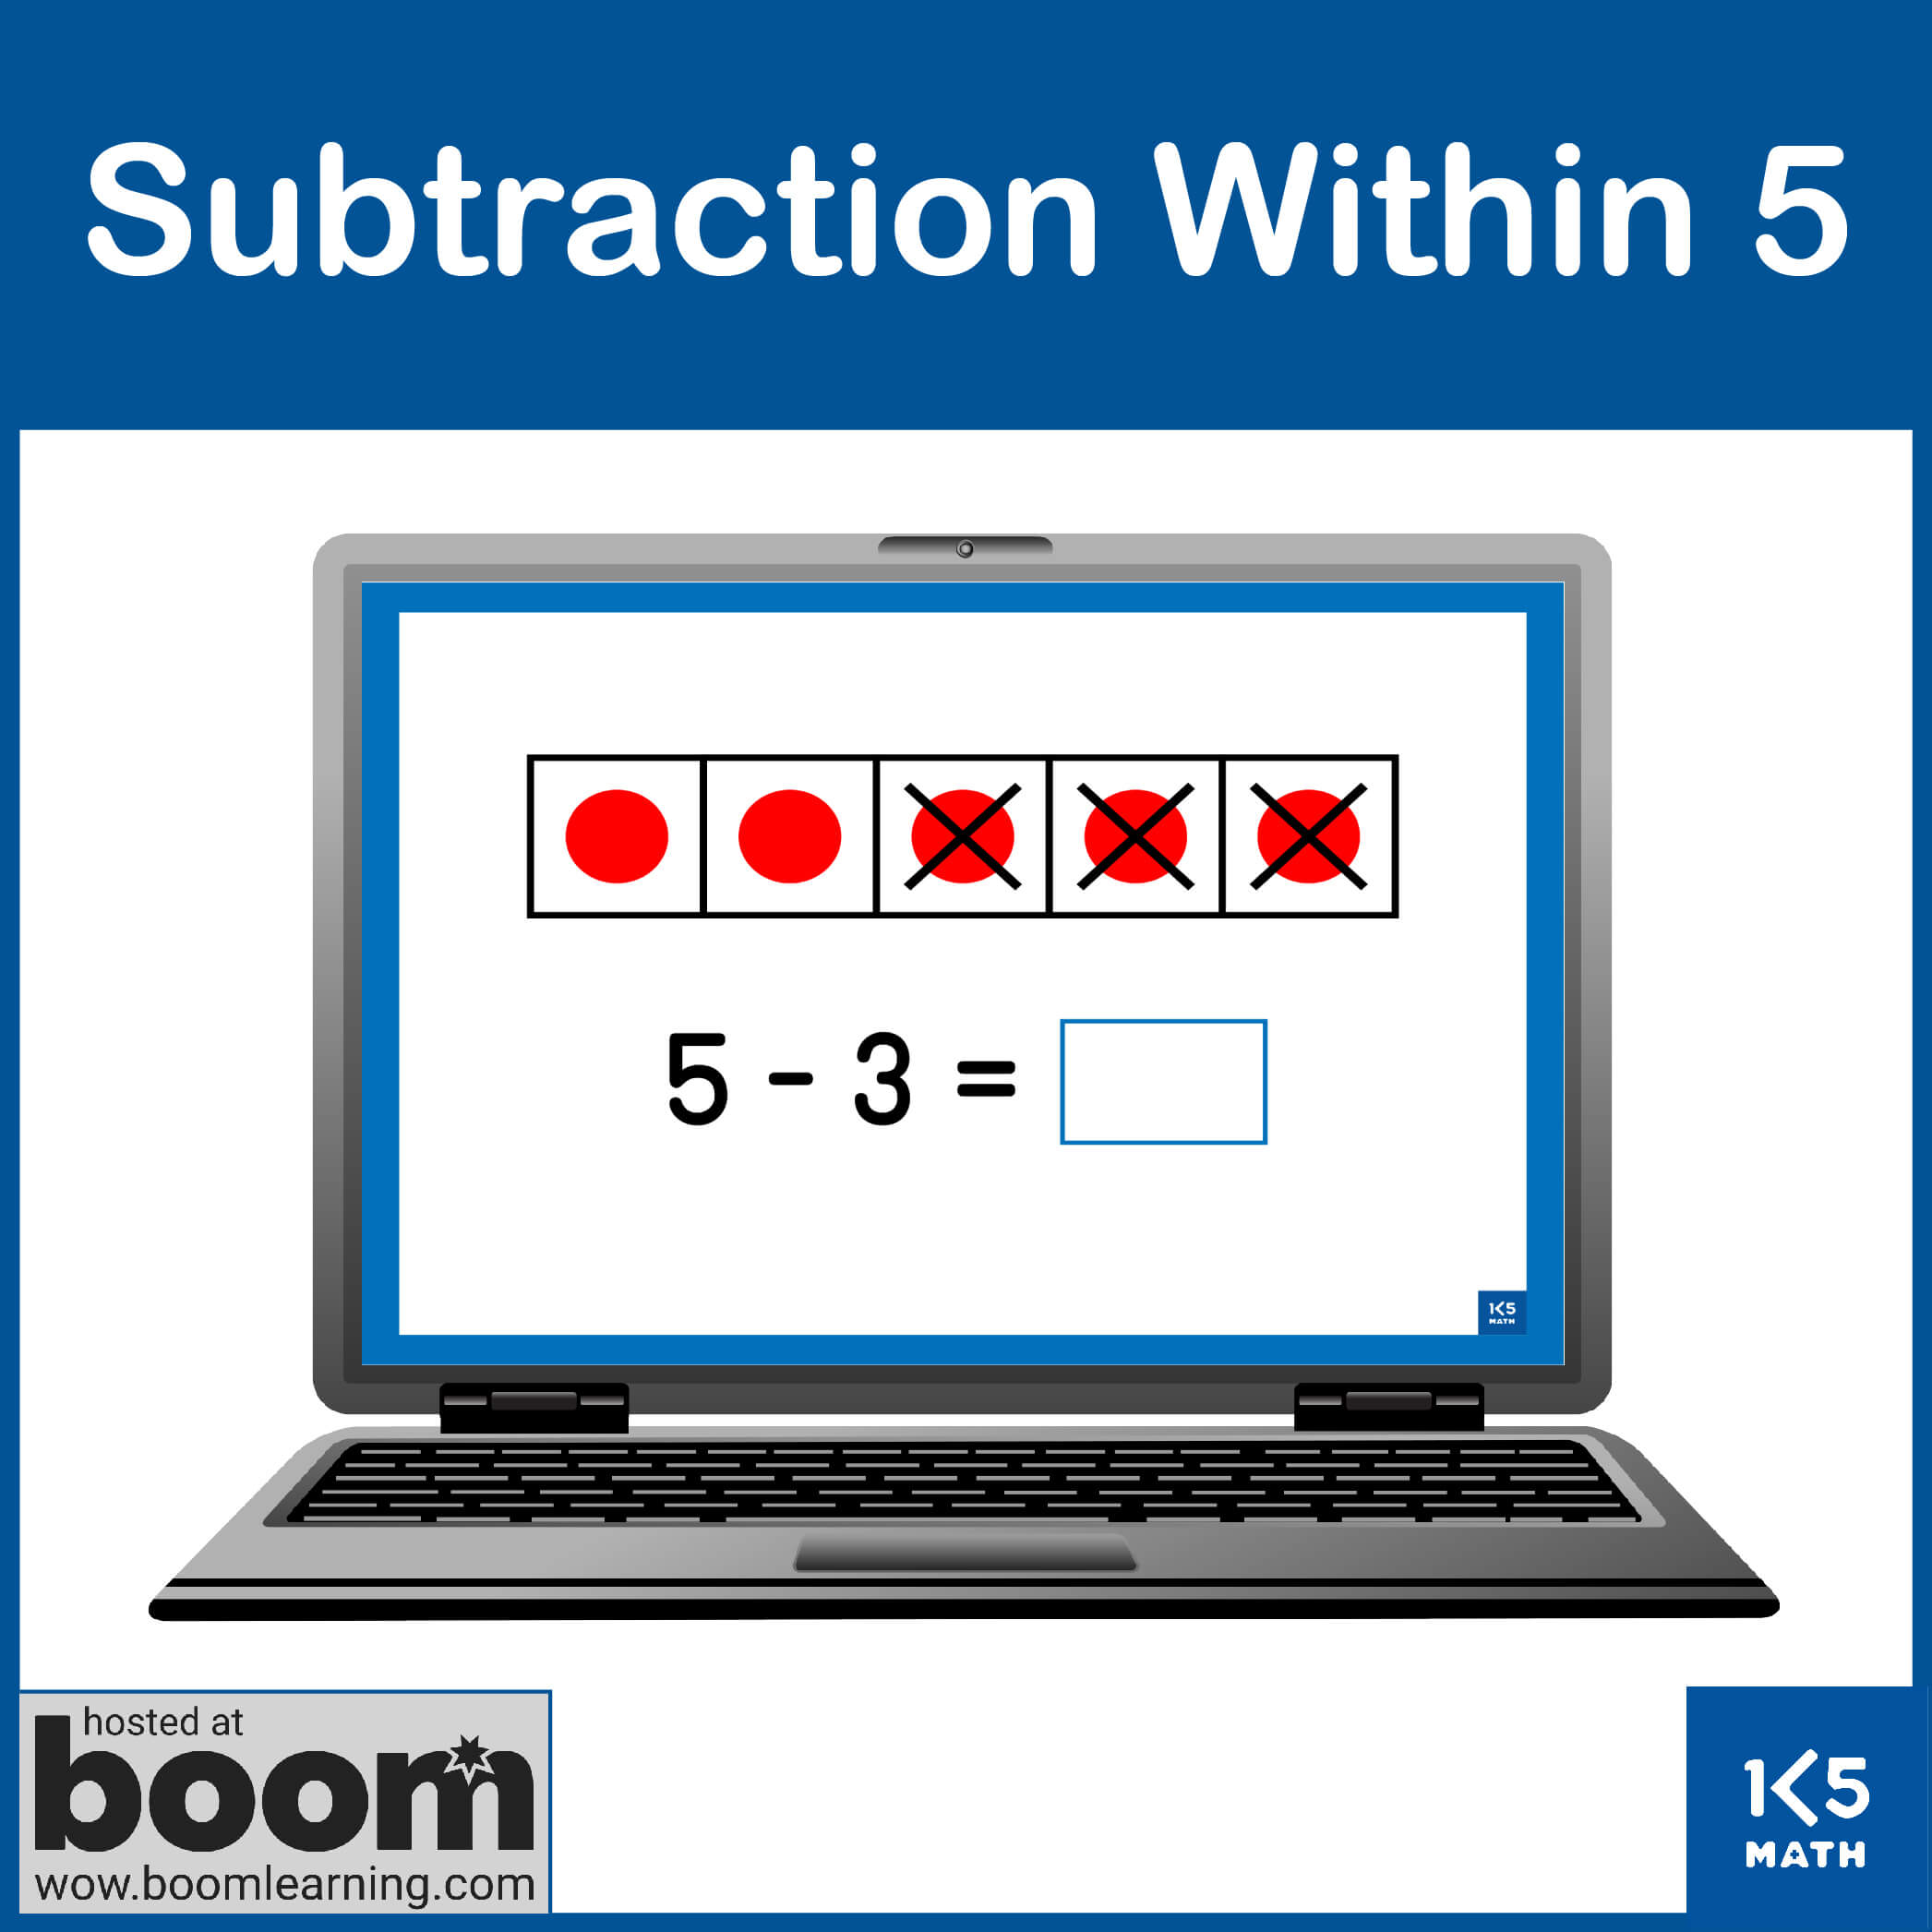 Boom Cards: Subtraction within 5